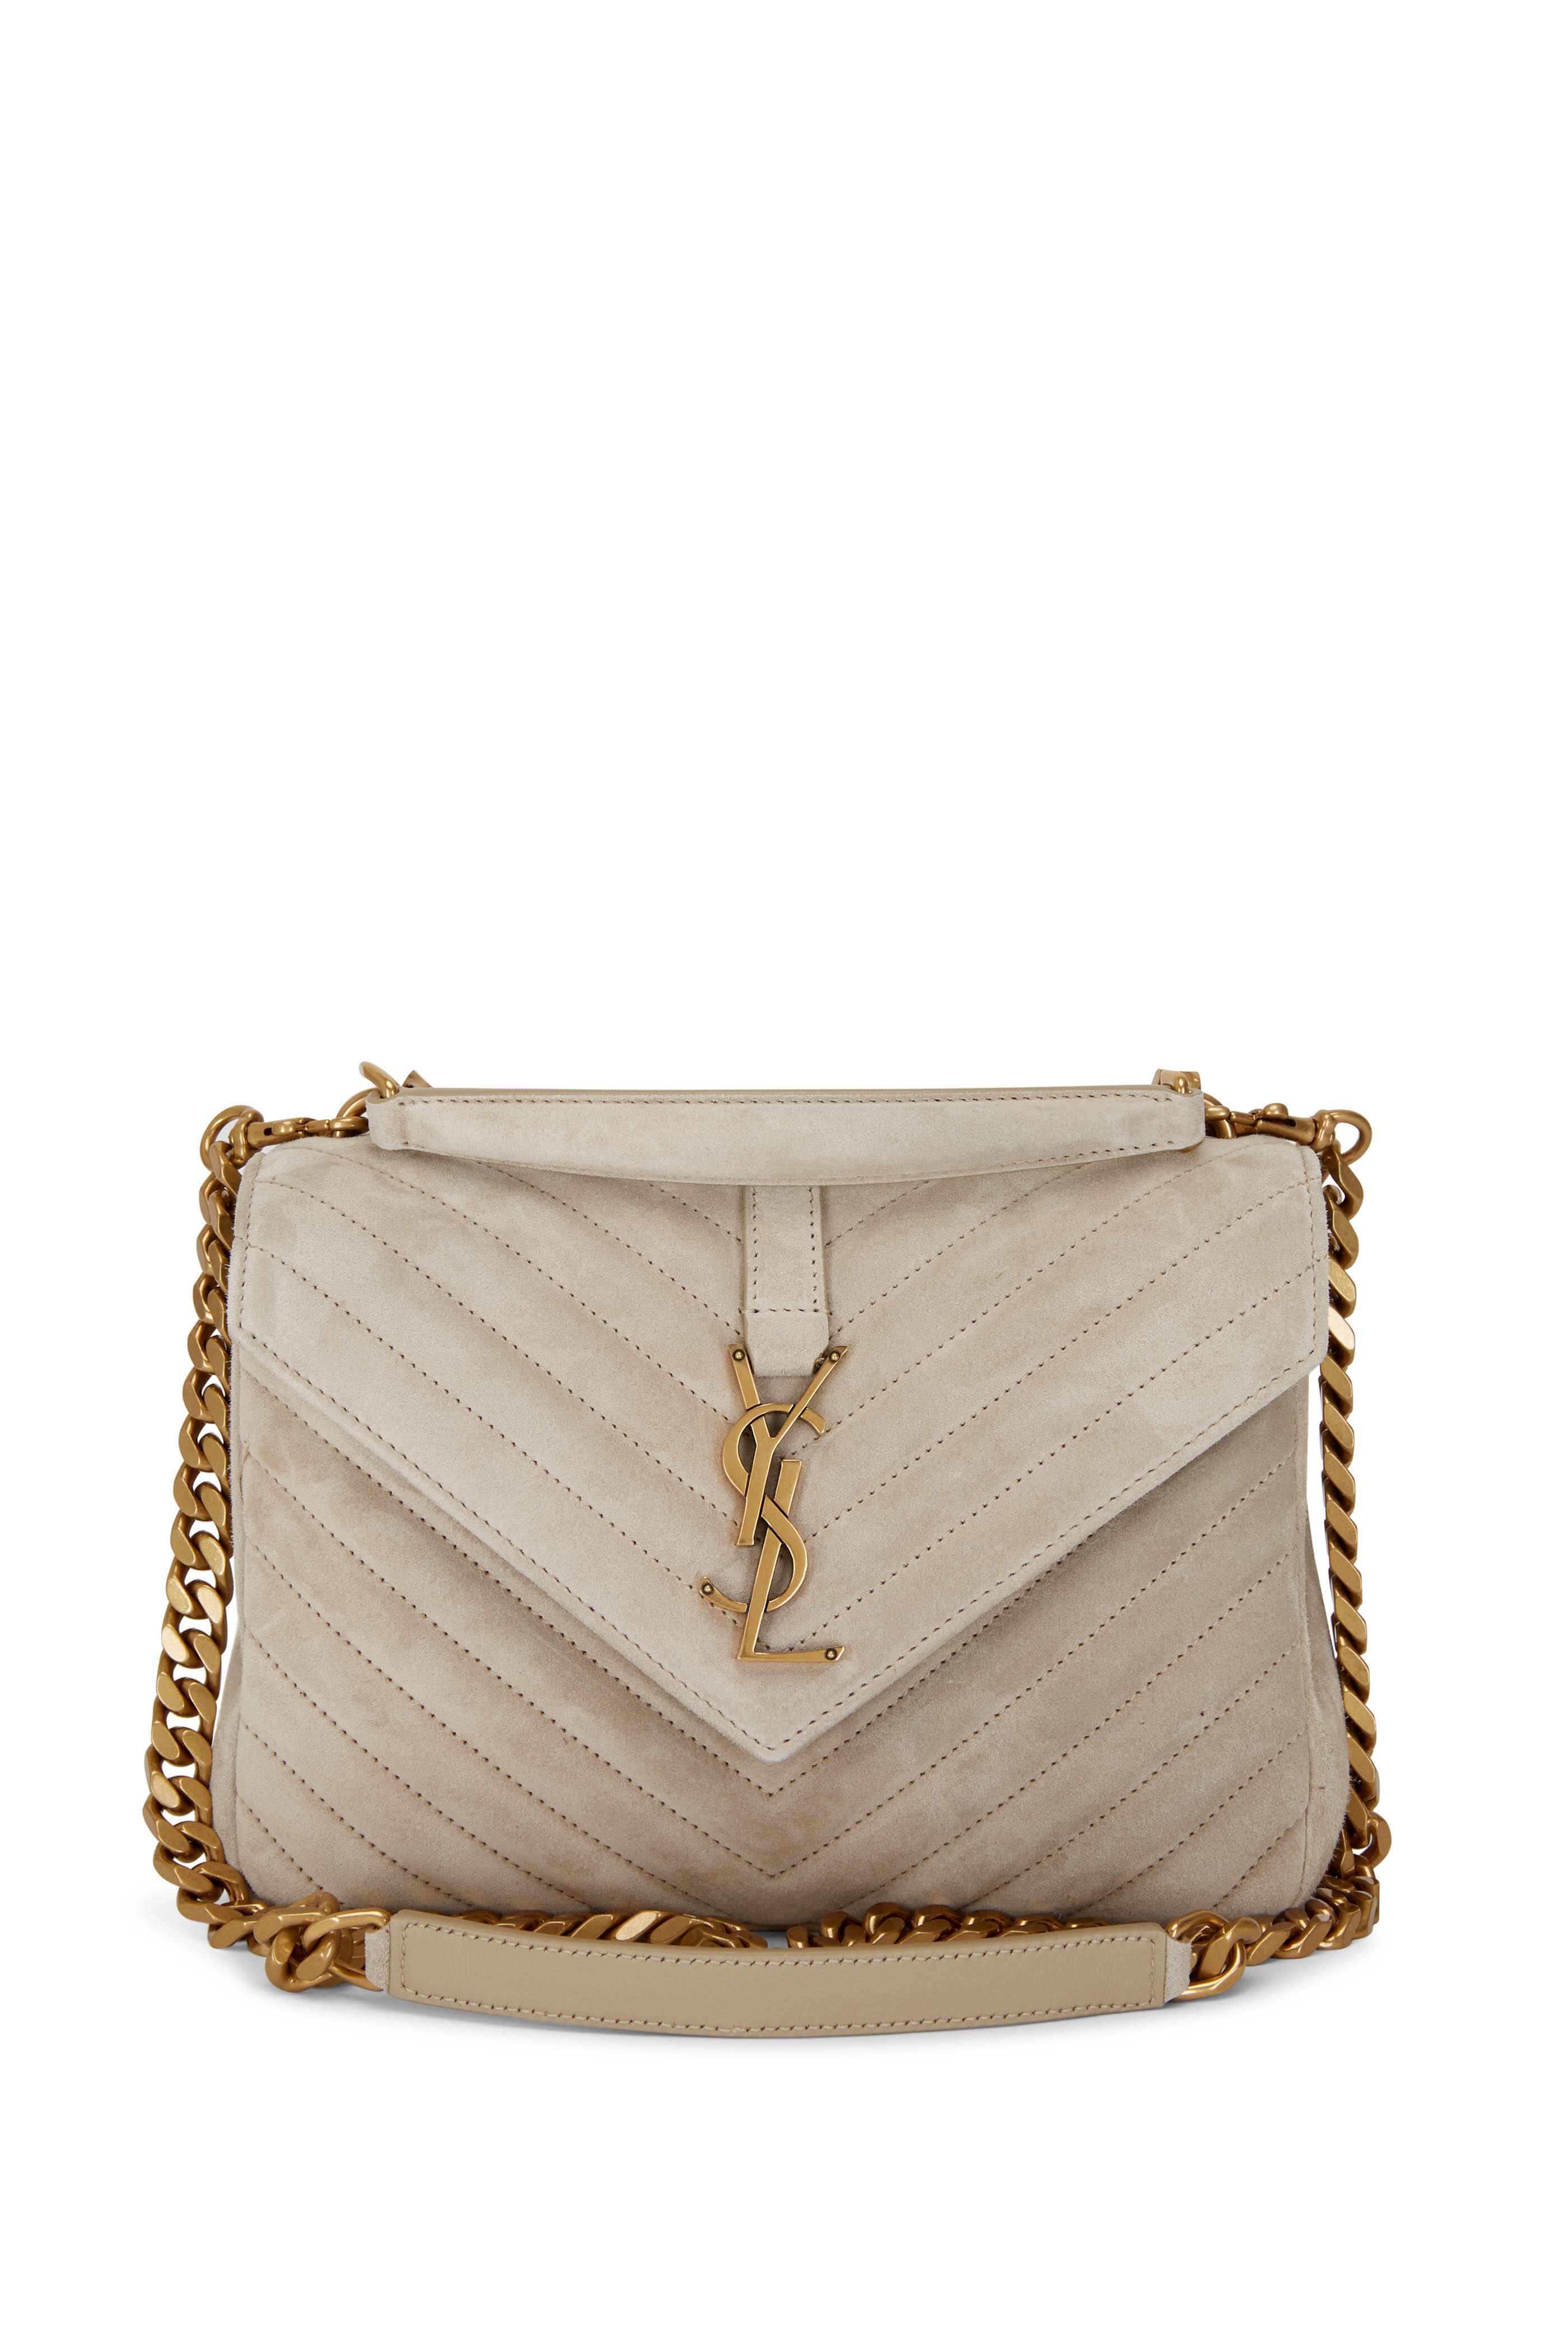 YSL College handbag casual outfit